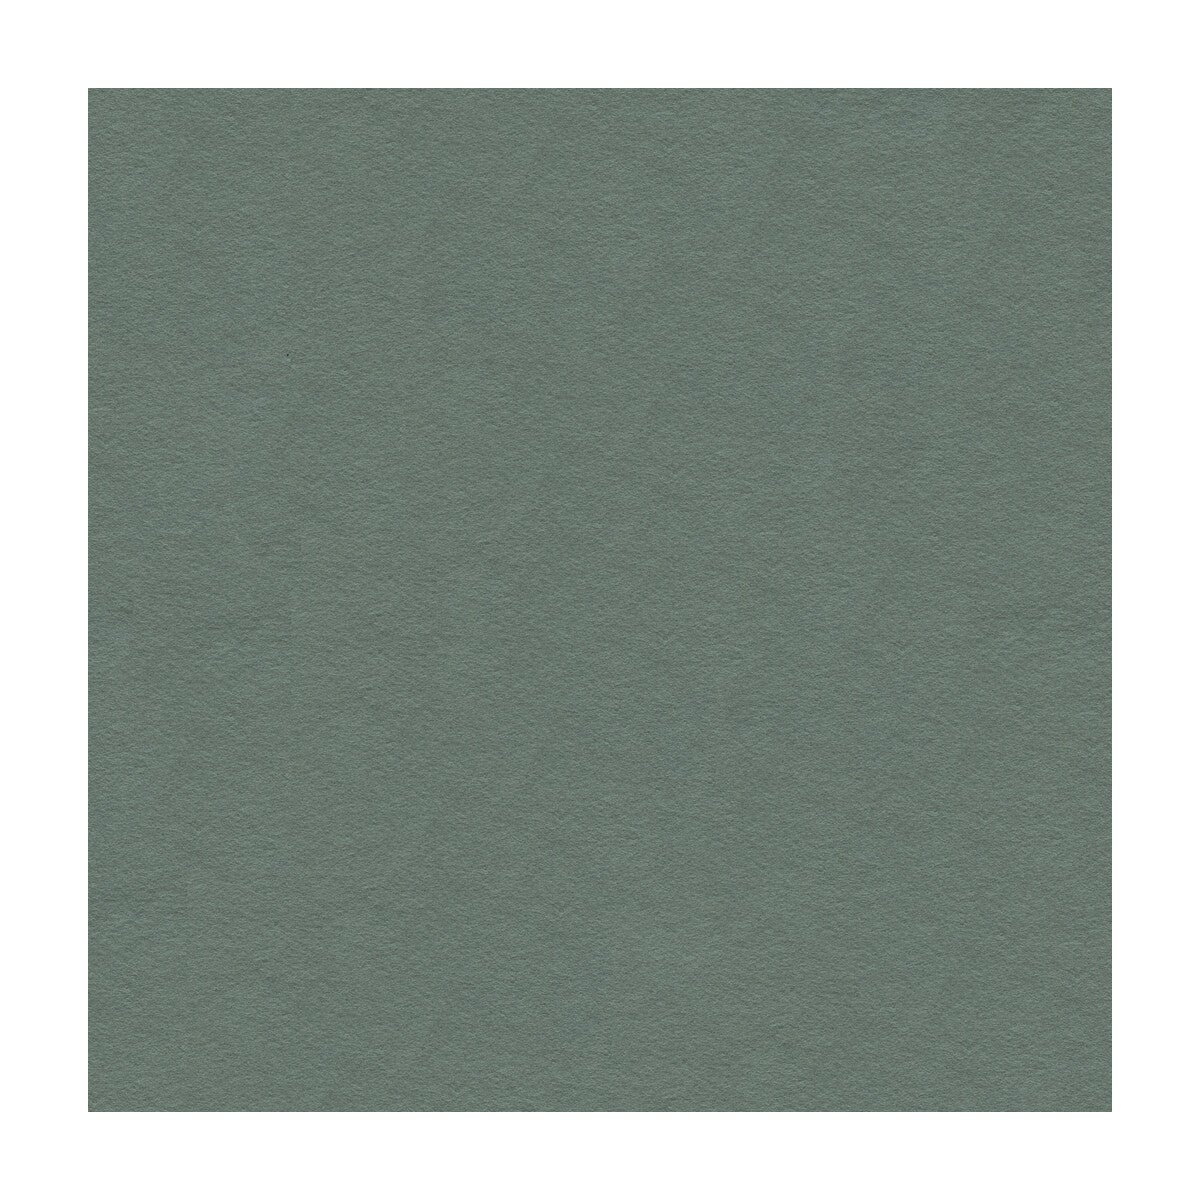 Ultrasuede Green fabric in dusk color - pattern 30787.5205.0 - by Kravet Design in the Performance collection